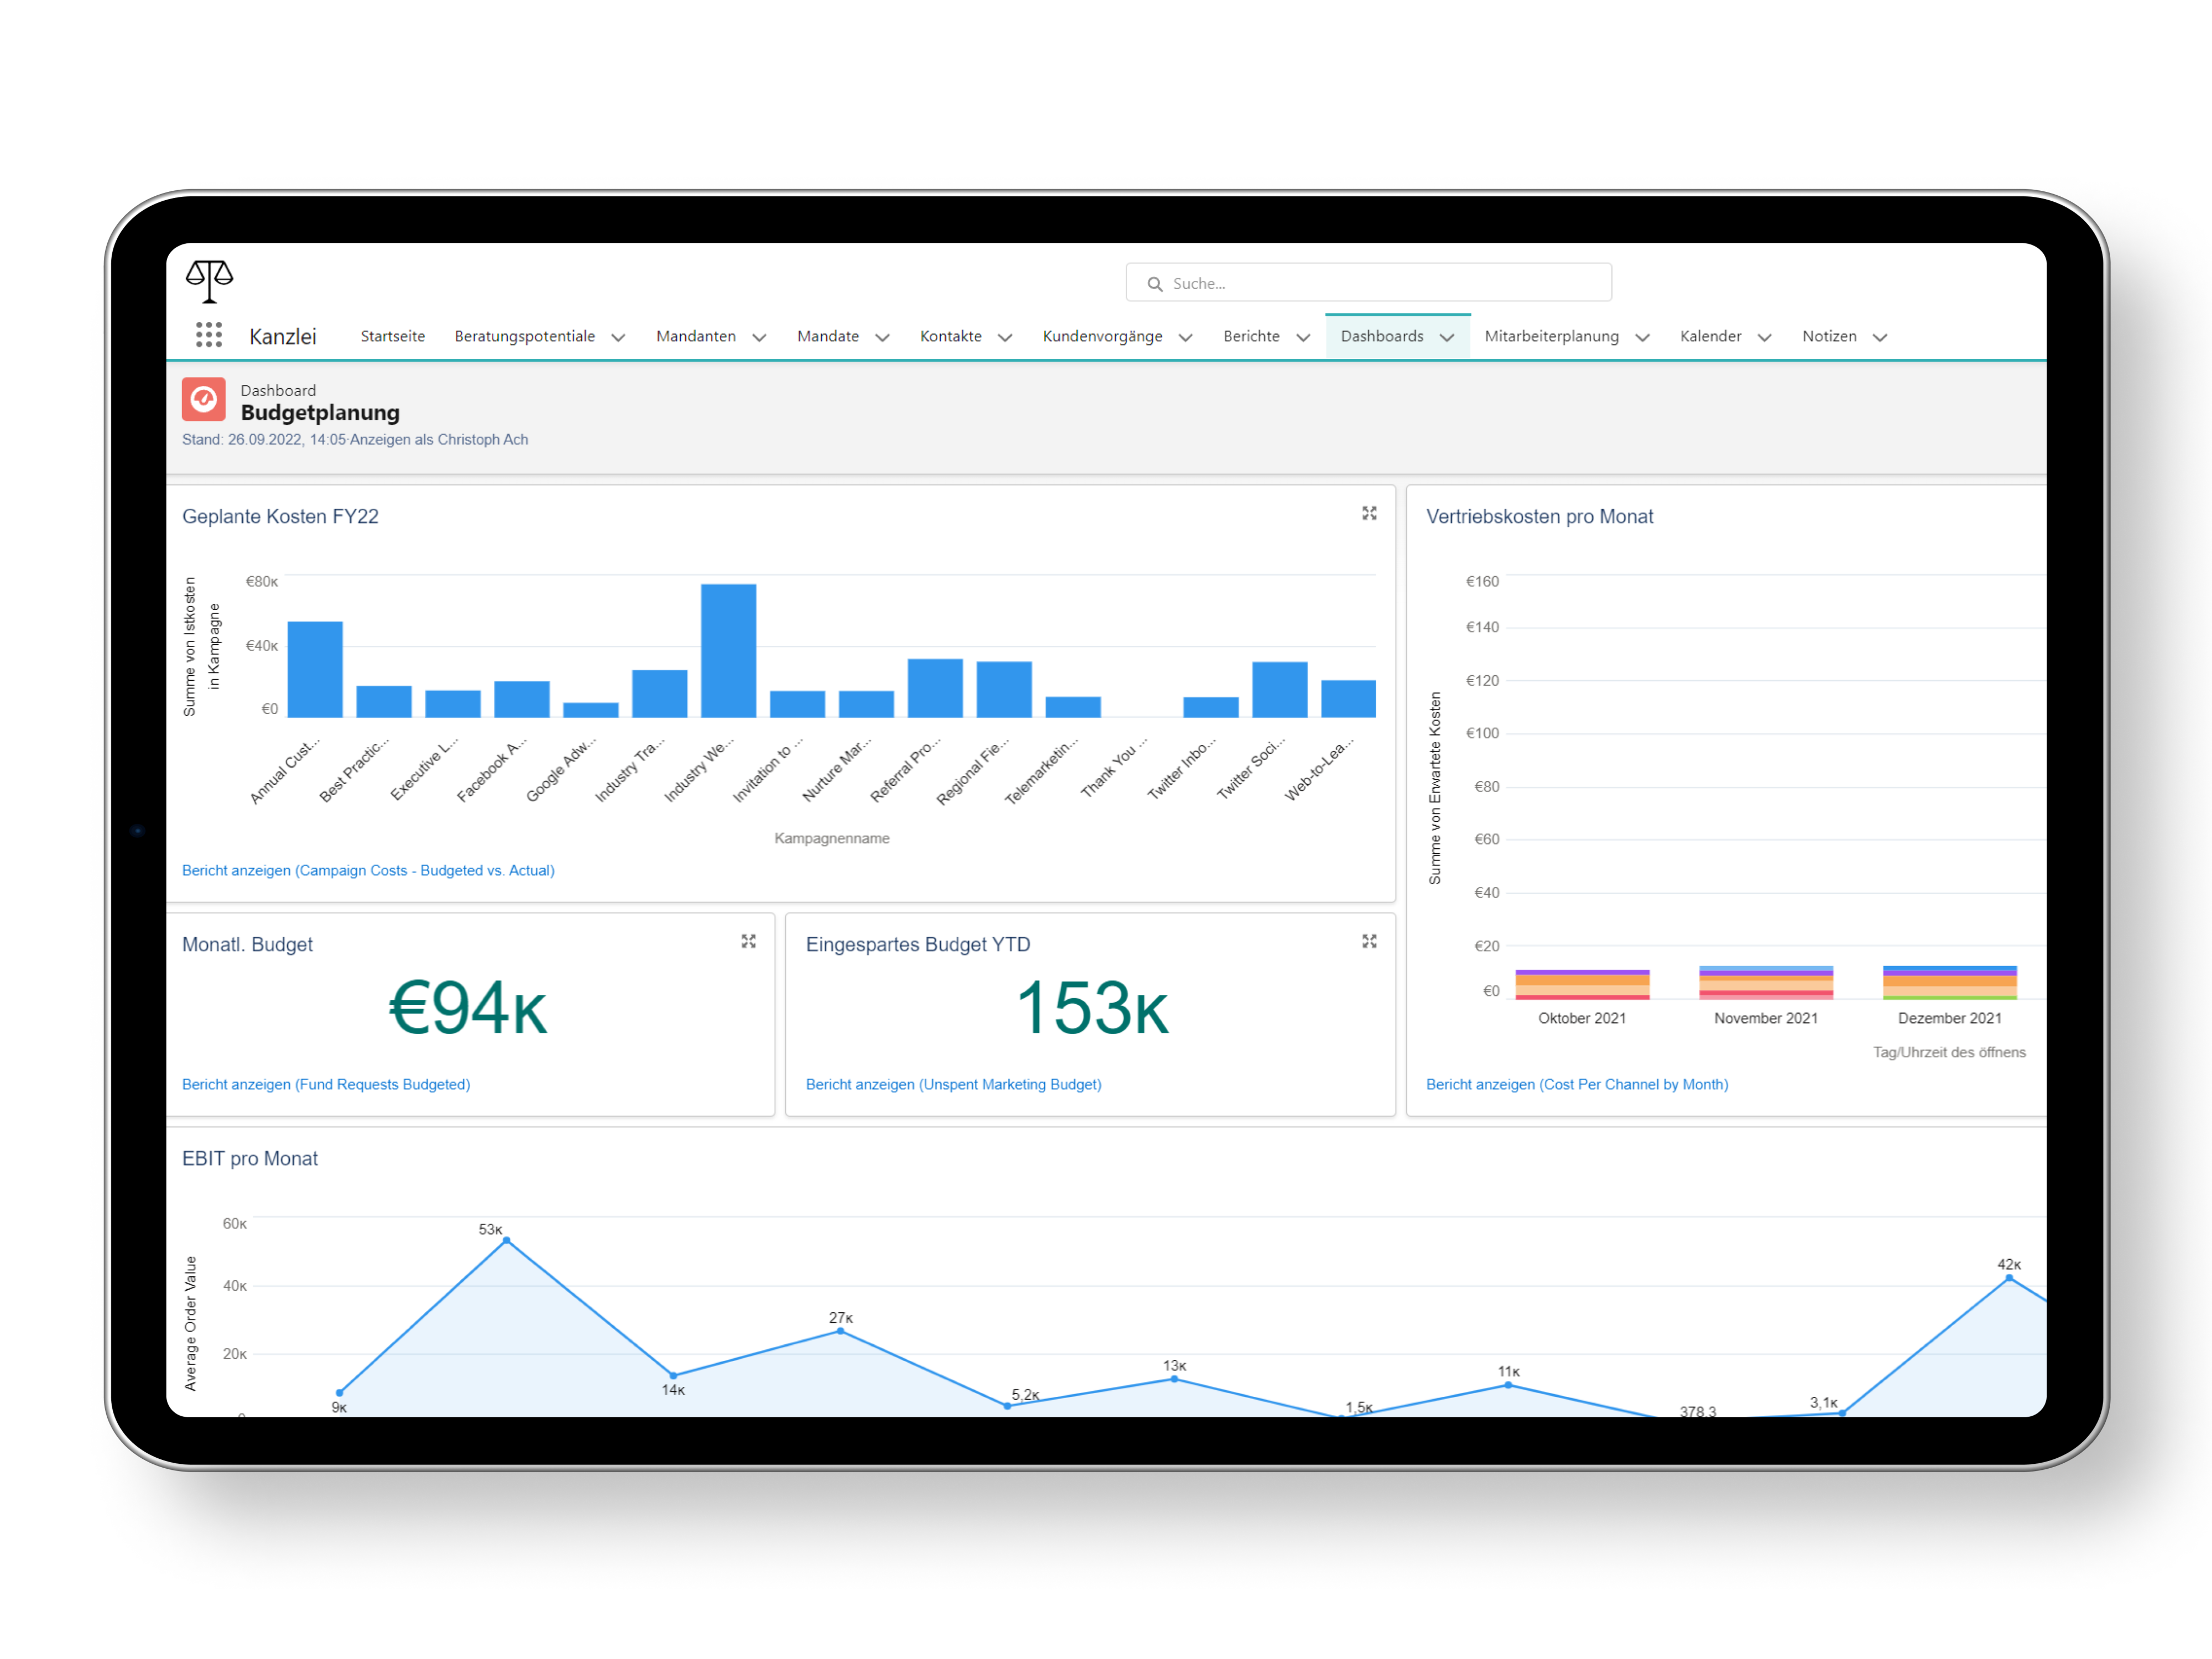 Screenshot of a Salesforce dashboard. With the help of various KPIs and visualizations, budget planning can be viewed and analyzed holistically. 